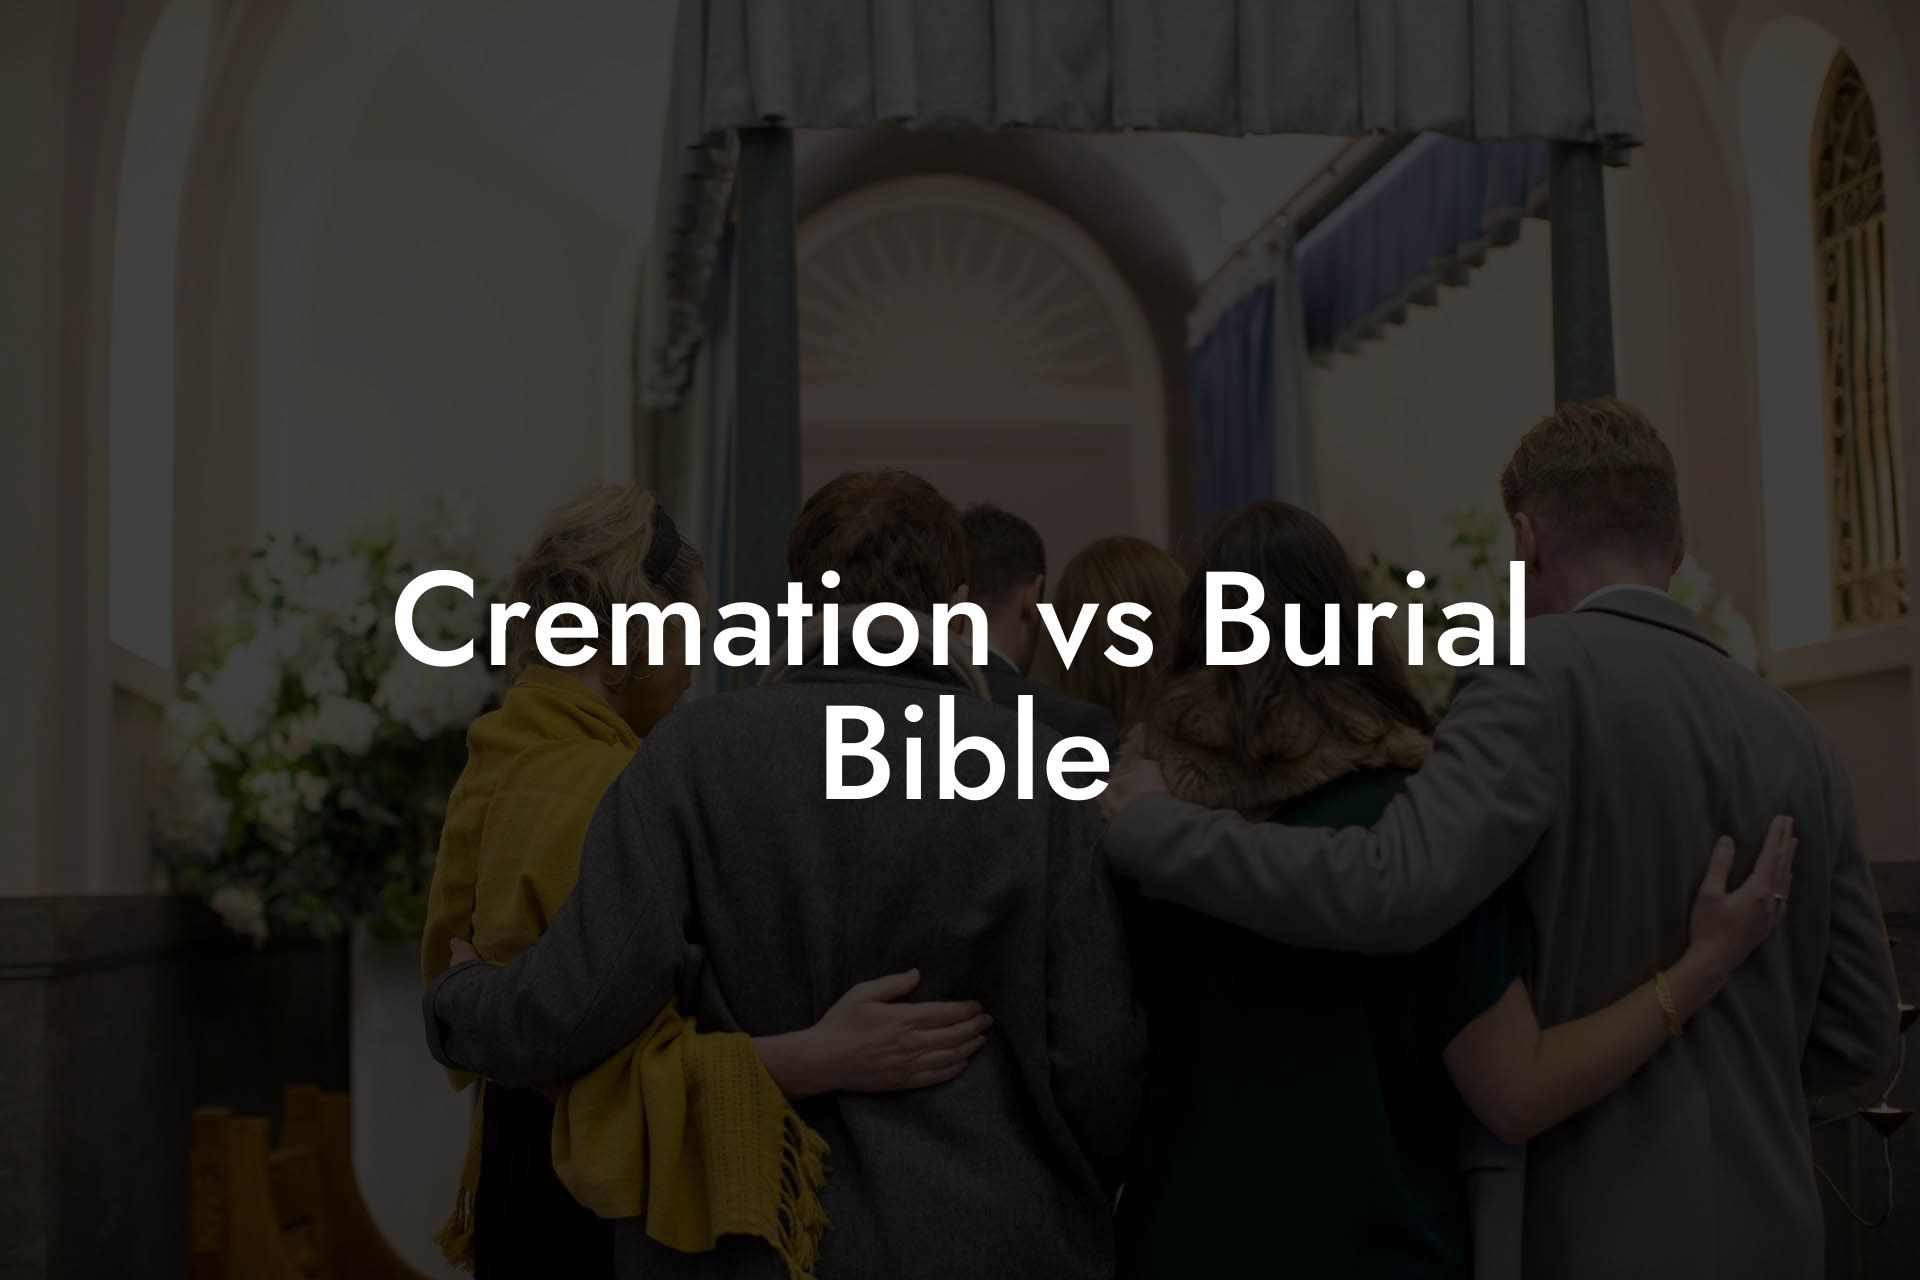 Cremation vs Burial Bible